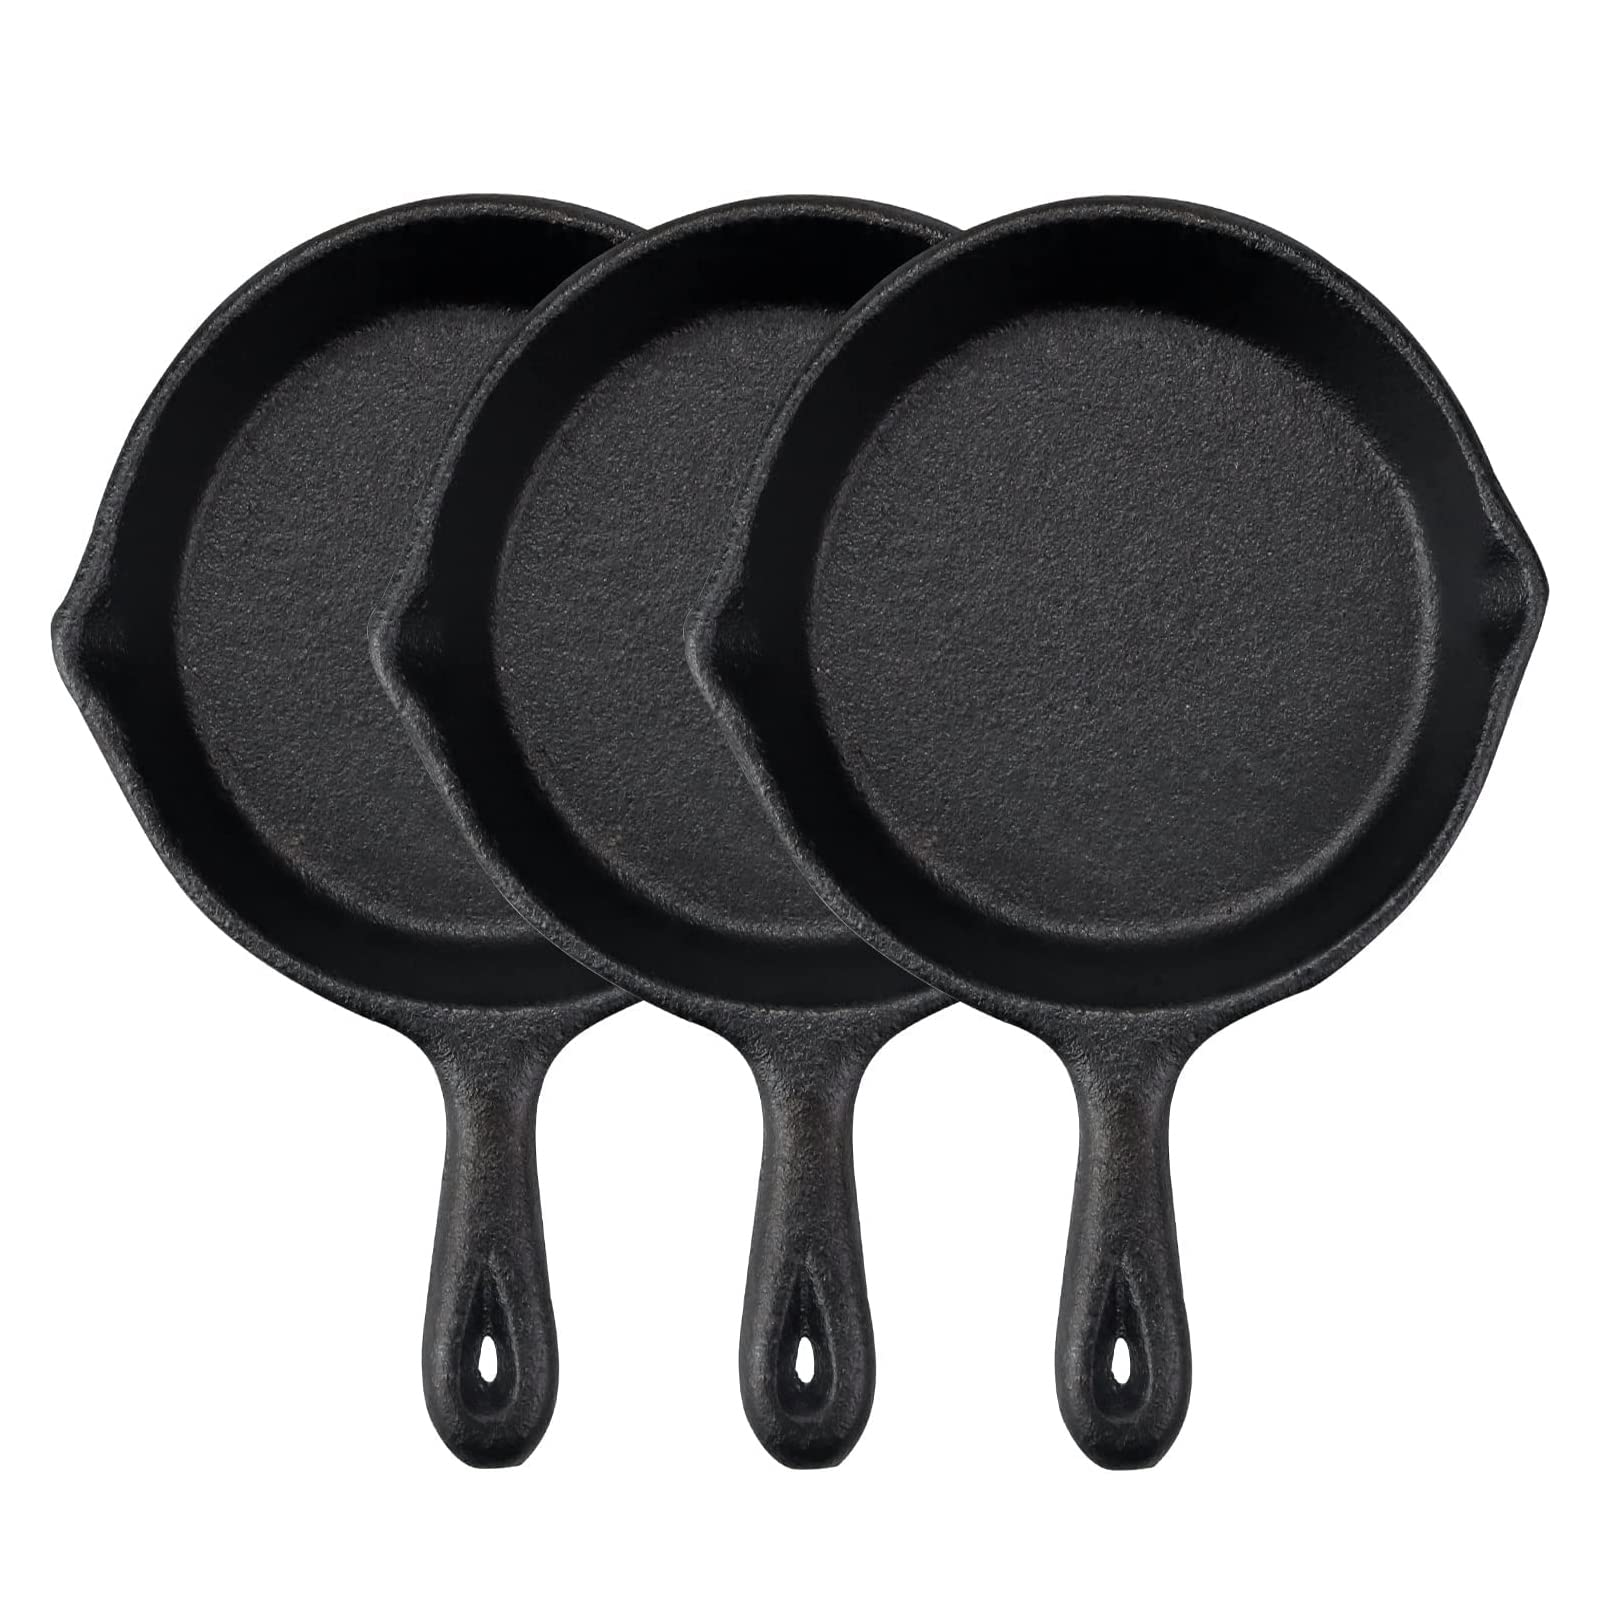 GothaBach 3 Pack 4'' Mini Cast Iron Skillet, Pre Seasoned Small Cast Iron Skillet for Baked Cookie, Brownie, Egg Cakes